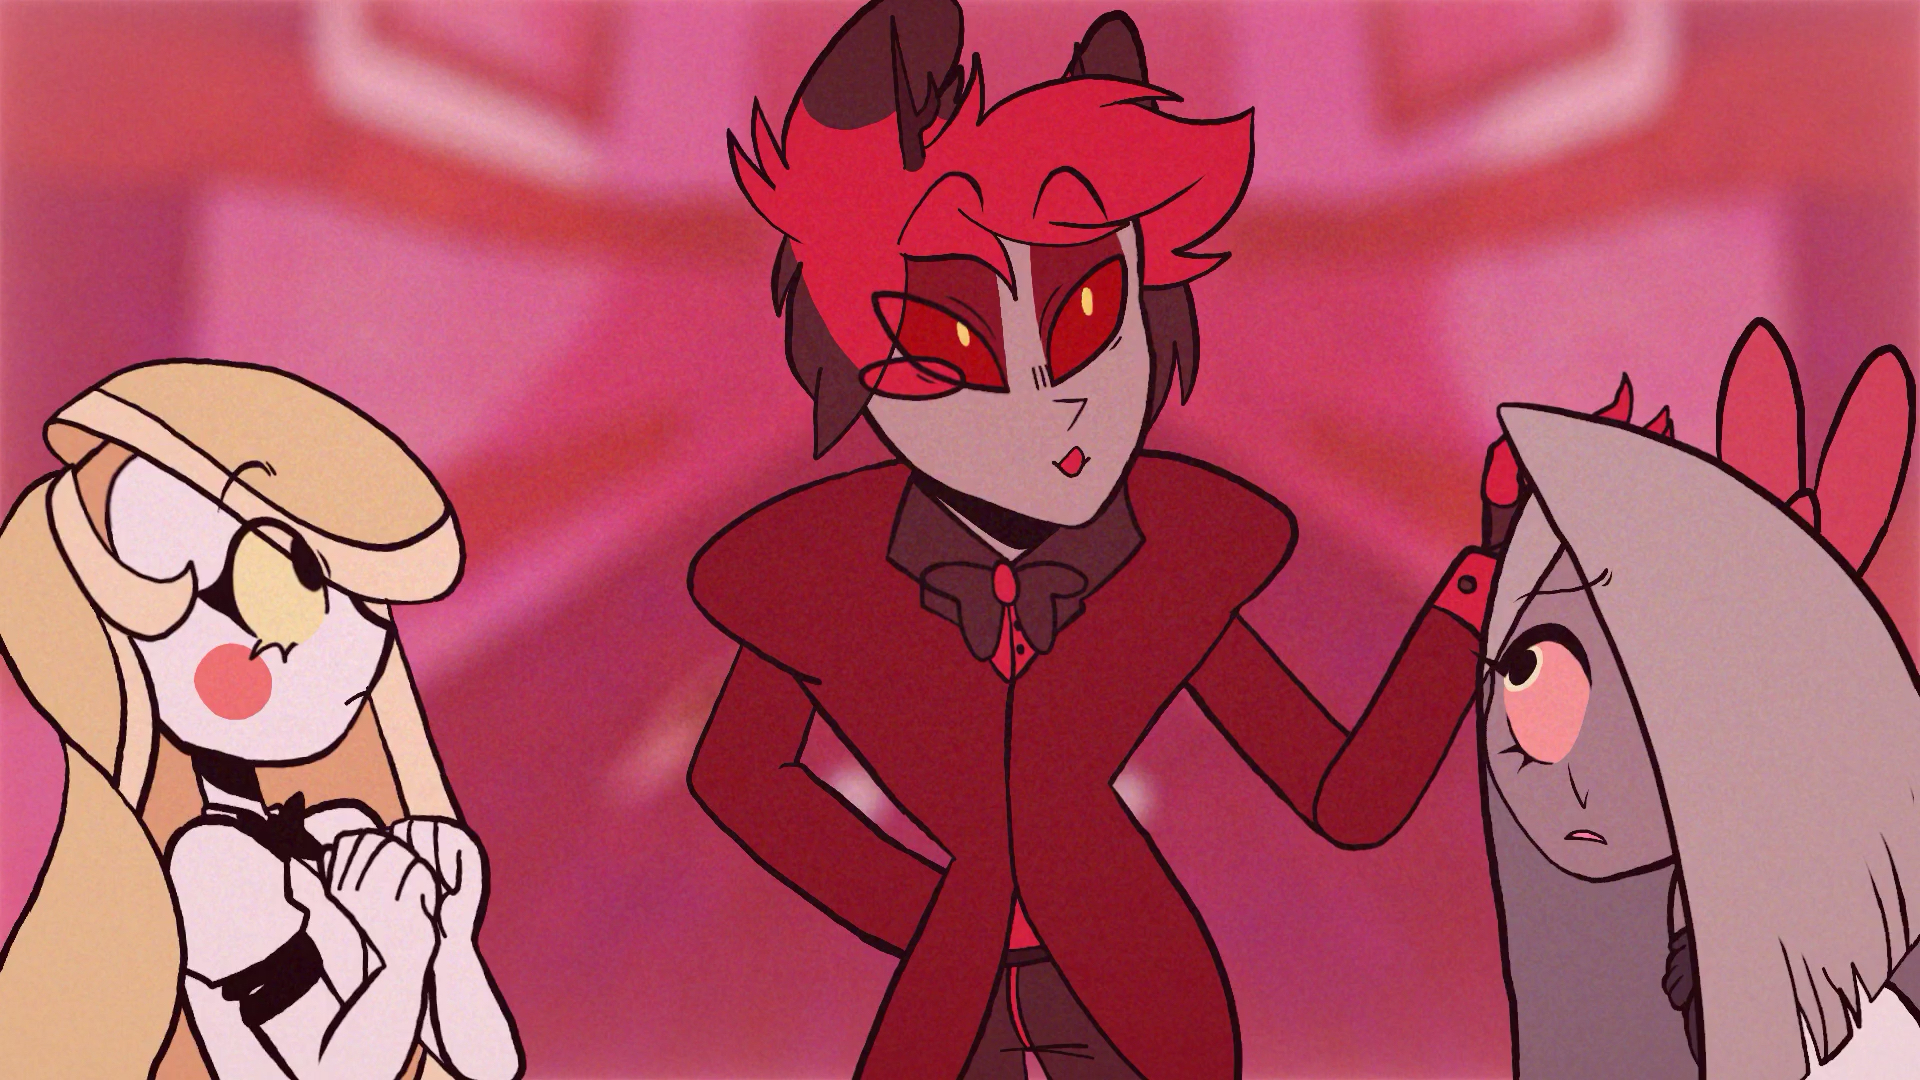 I forgot to post this other scene I did for the hazbin hotel (rebooked) pro...